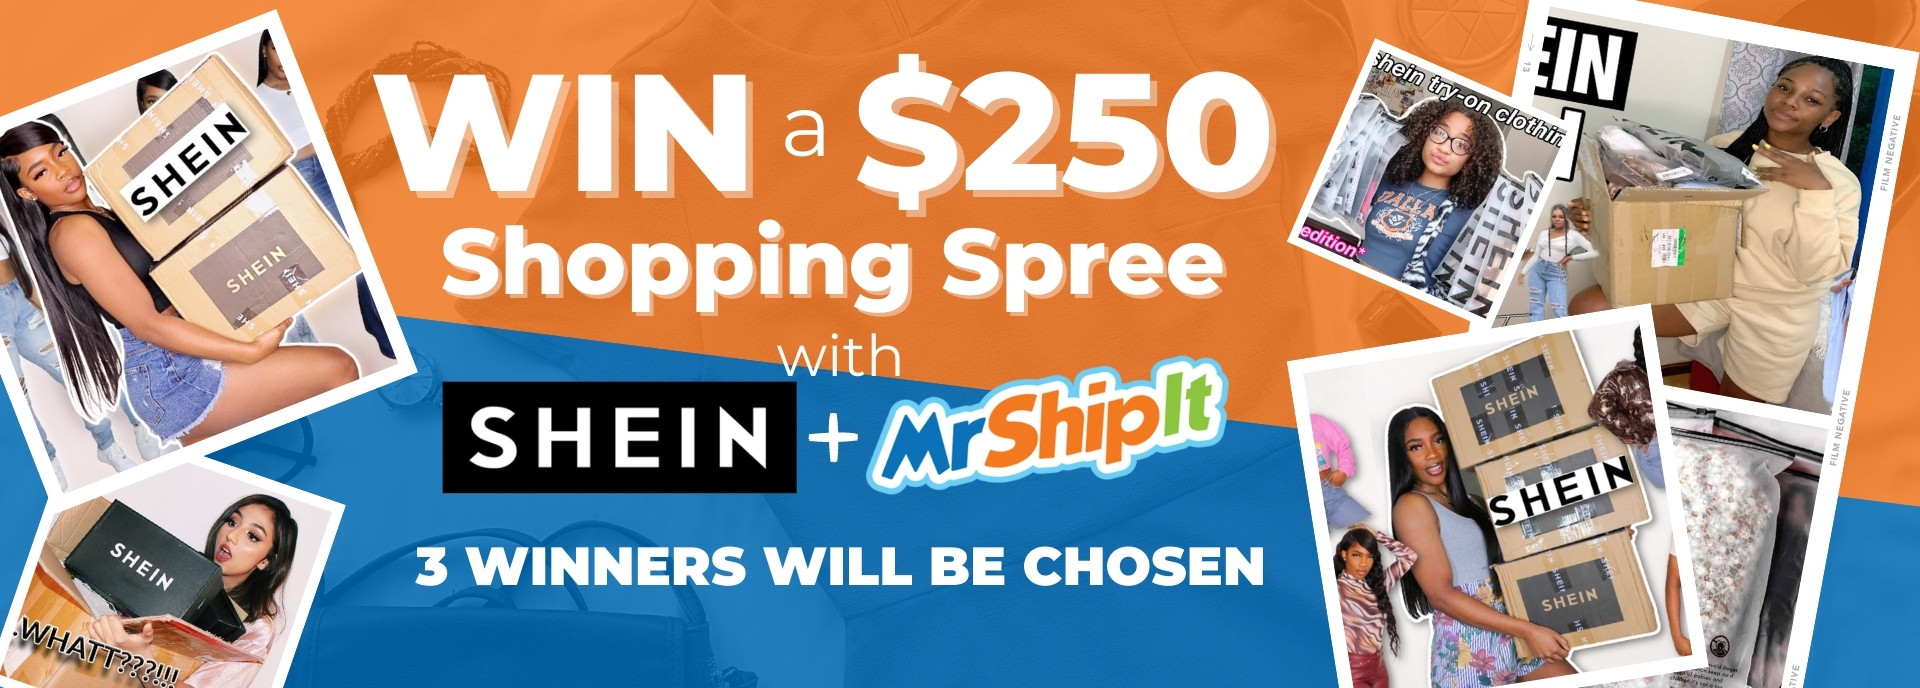 Win with Mr. Ship It and Shein